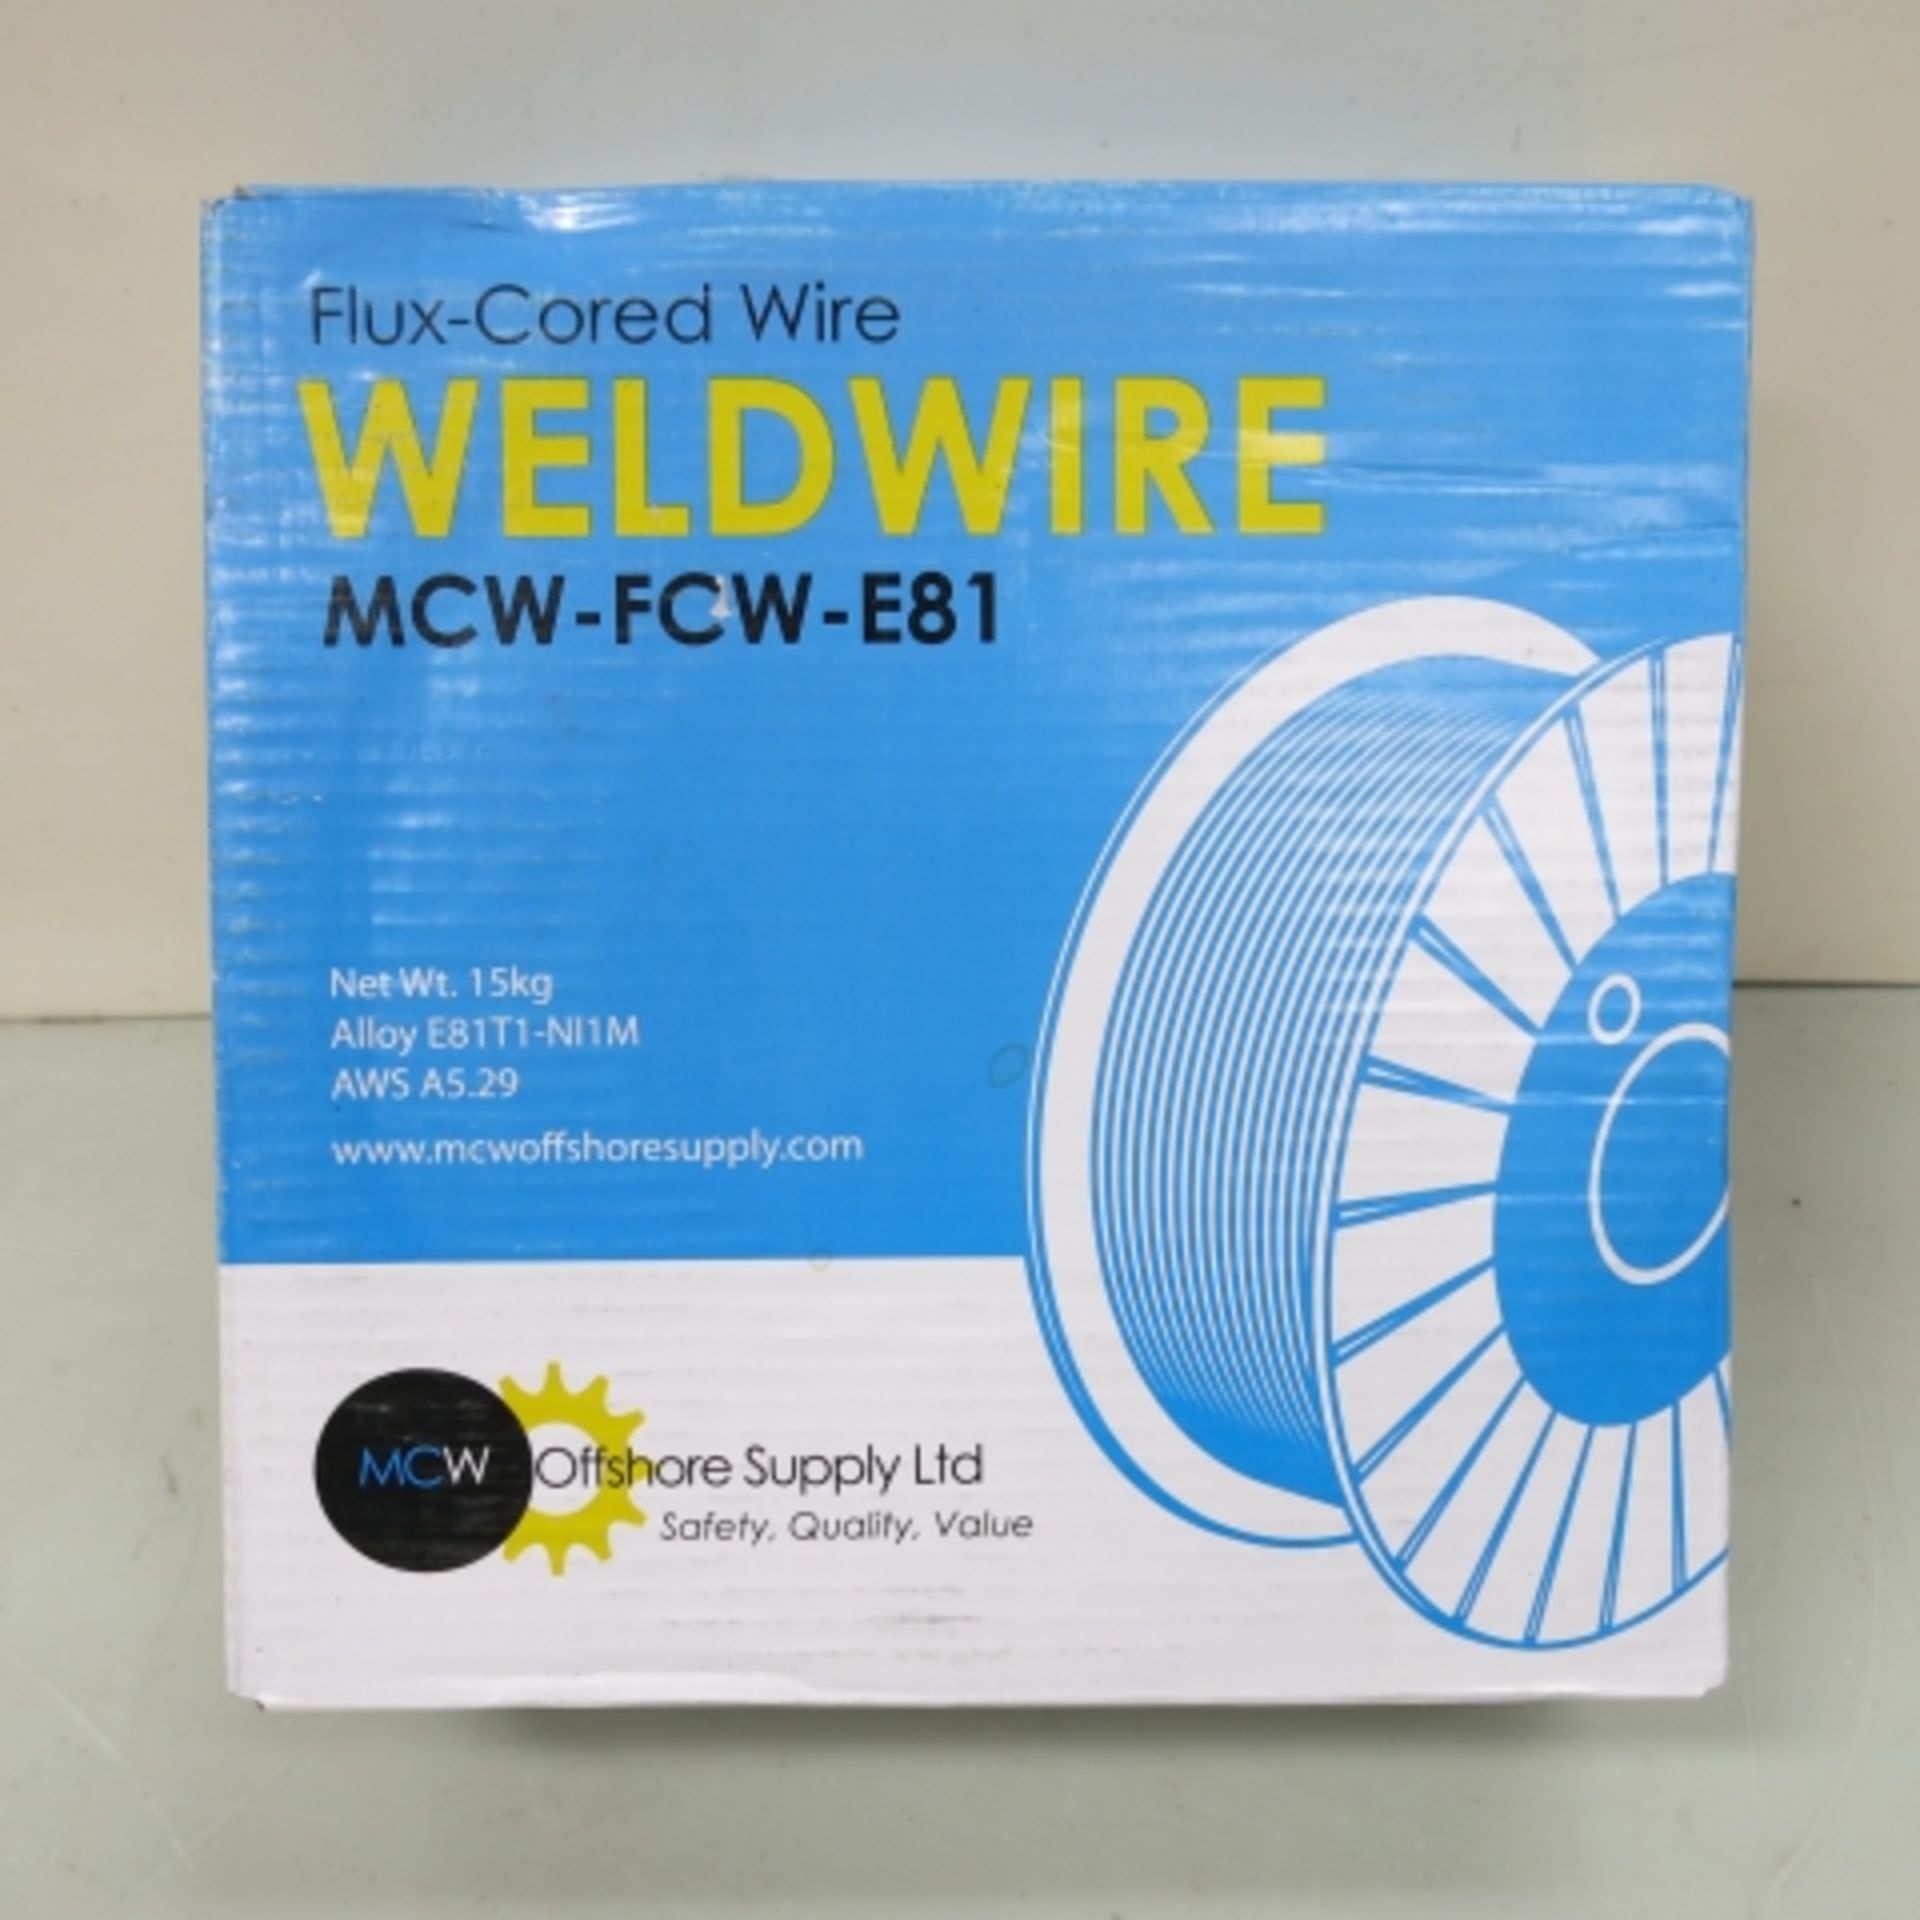 10 x packs of Flux Cored Welding Wire. Make: MCW Offshore Supply Ltd. Type: MCW-FCW-E81. Alloy: